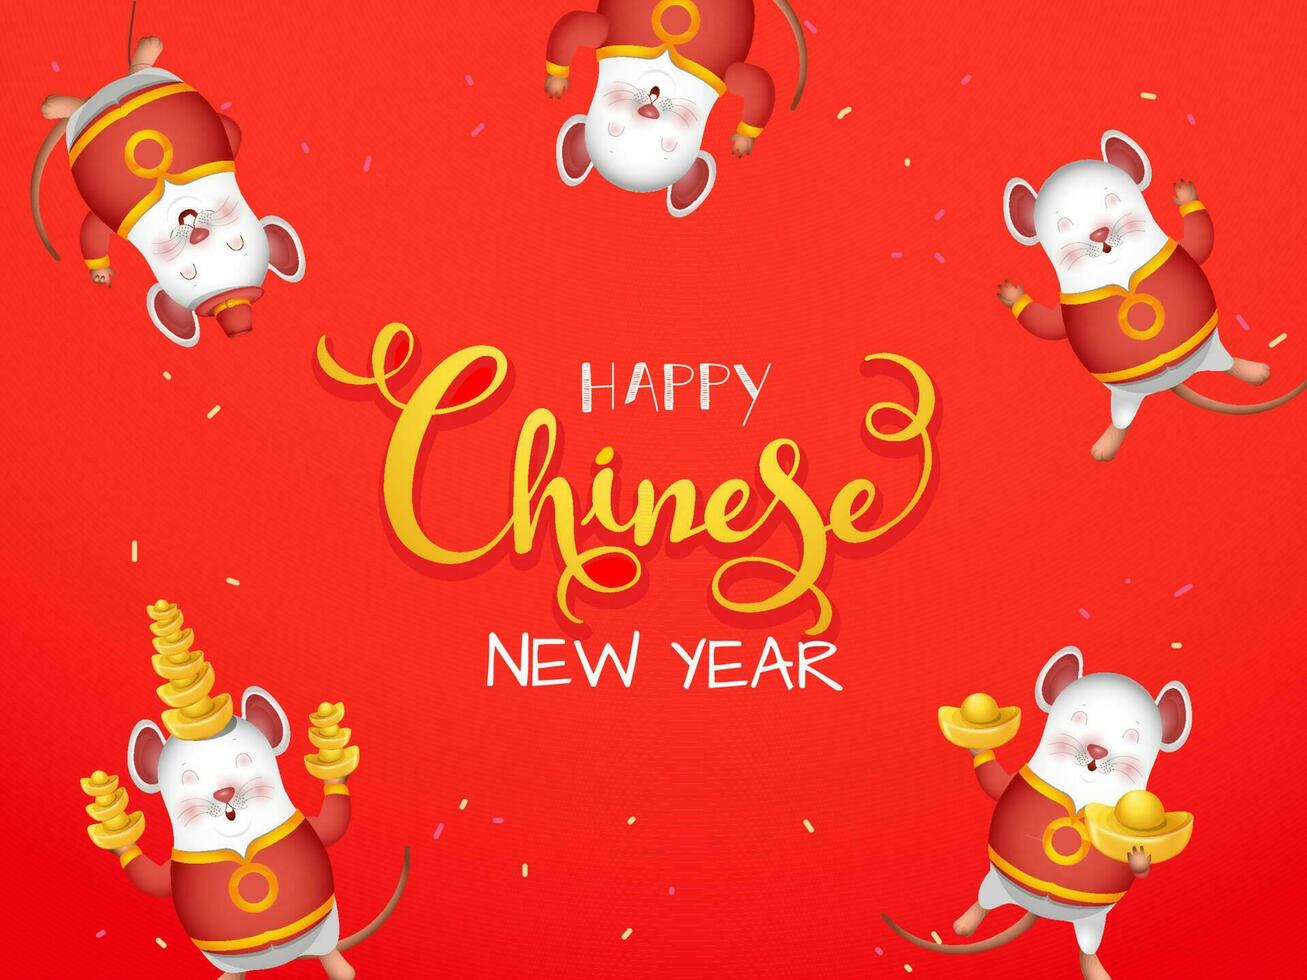 Happy Chinese New Year Font with Cartoon Character of Rat holding Ingots in Dancing Pose on Orange Background. vector